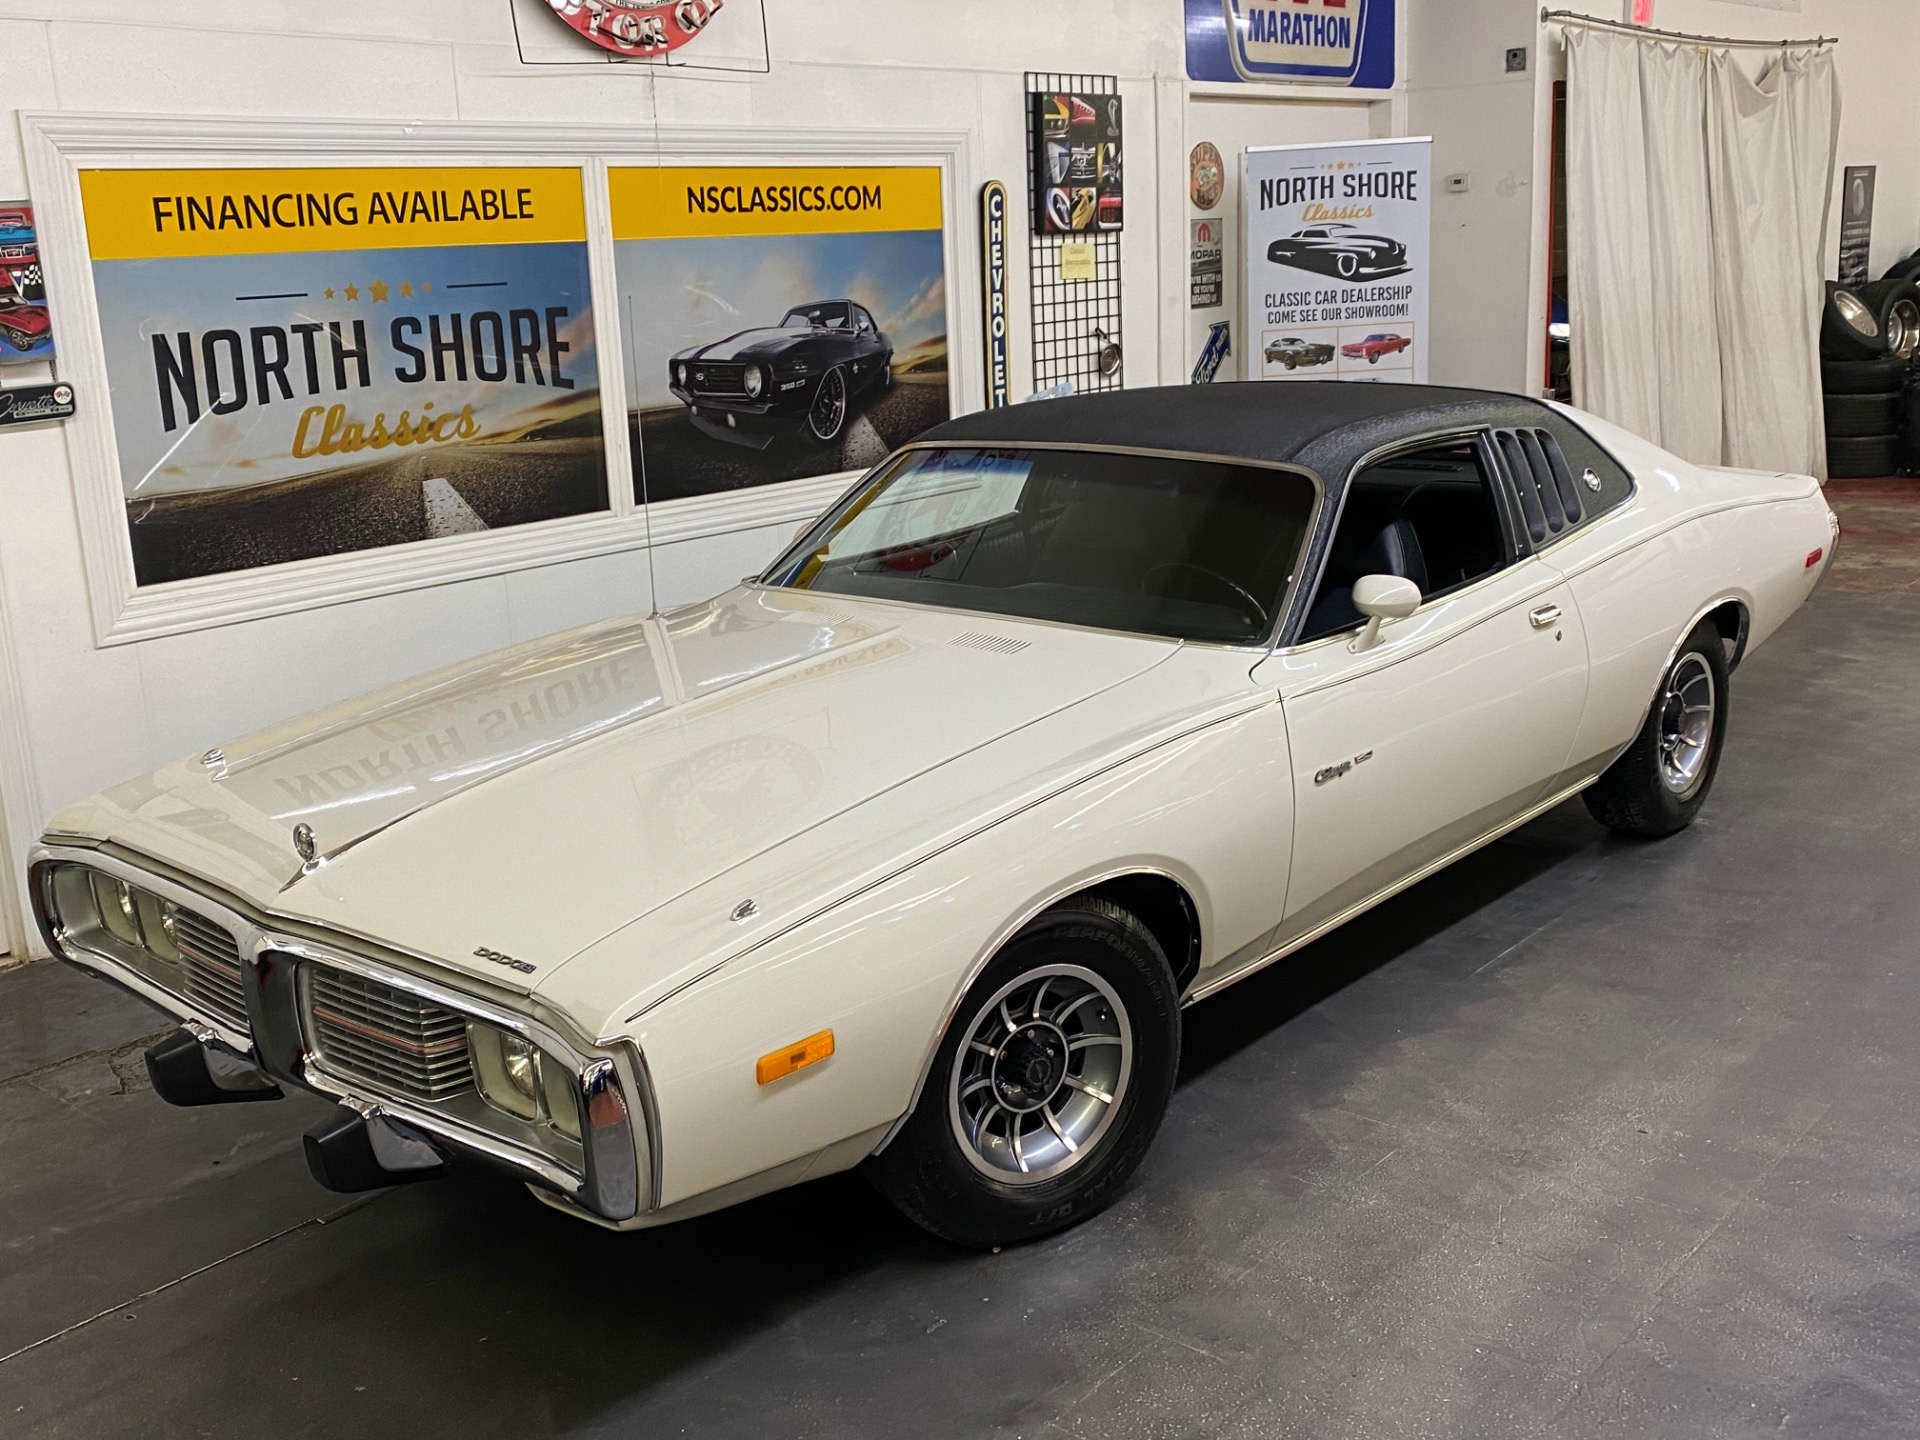 Used 1973 Dodge Charger - SE BROUGHAM - FACTORY A/C - 400 ENGINE - SEE  VIDEO For Sale (Sold) | North Shore Classics Stock #73944NSC